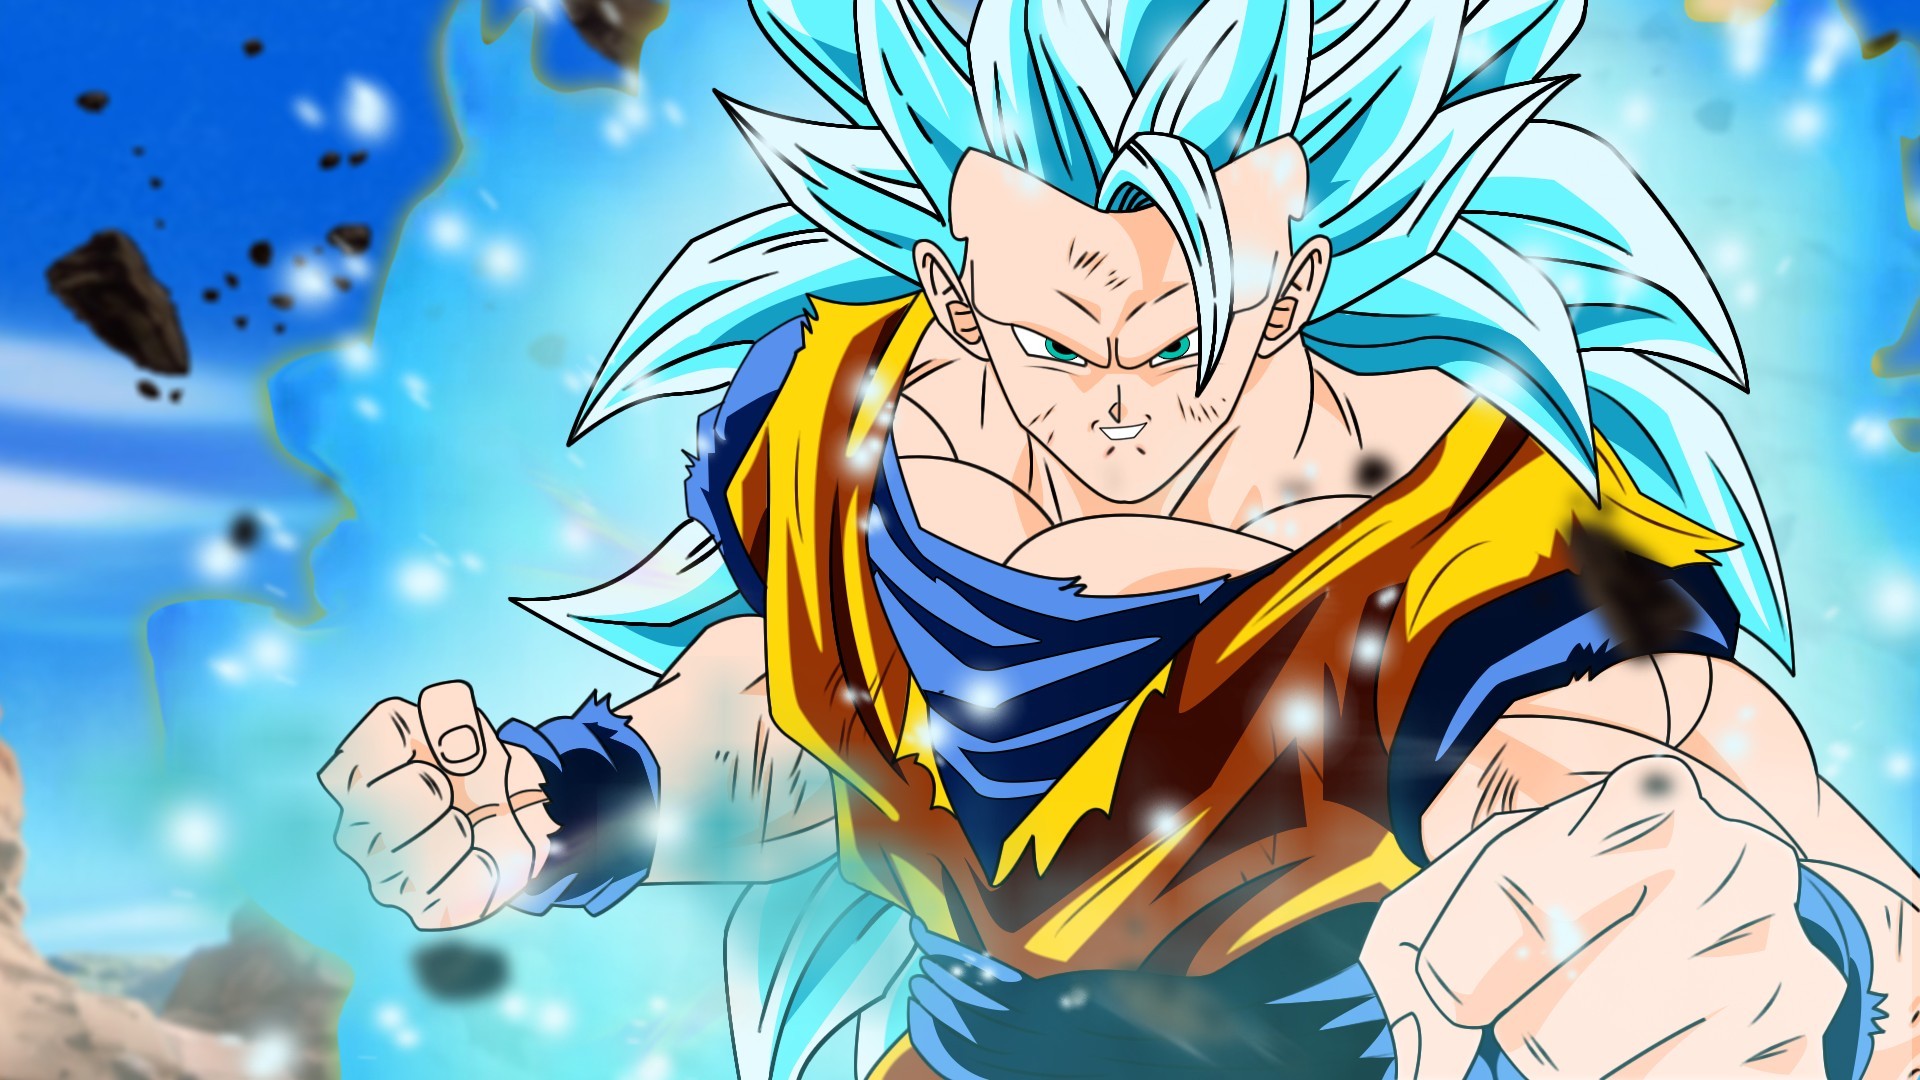 Goku SSJ3 Desktop Wallpaper with resolution 1920X1080 pixel. You can use this wallpaper as background for your desktop Computer Screensavers, Android or iPhone smartphones